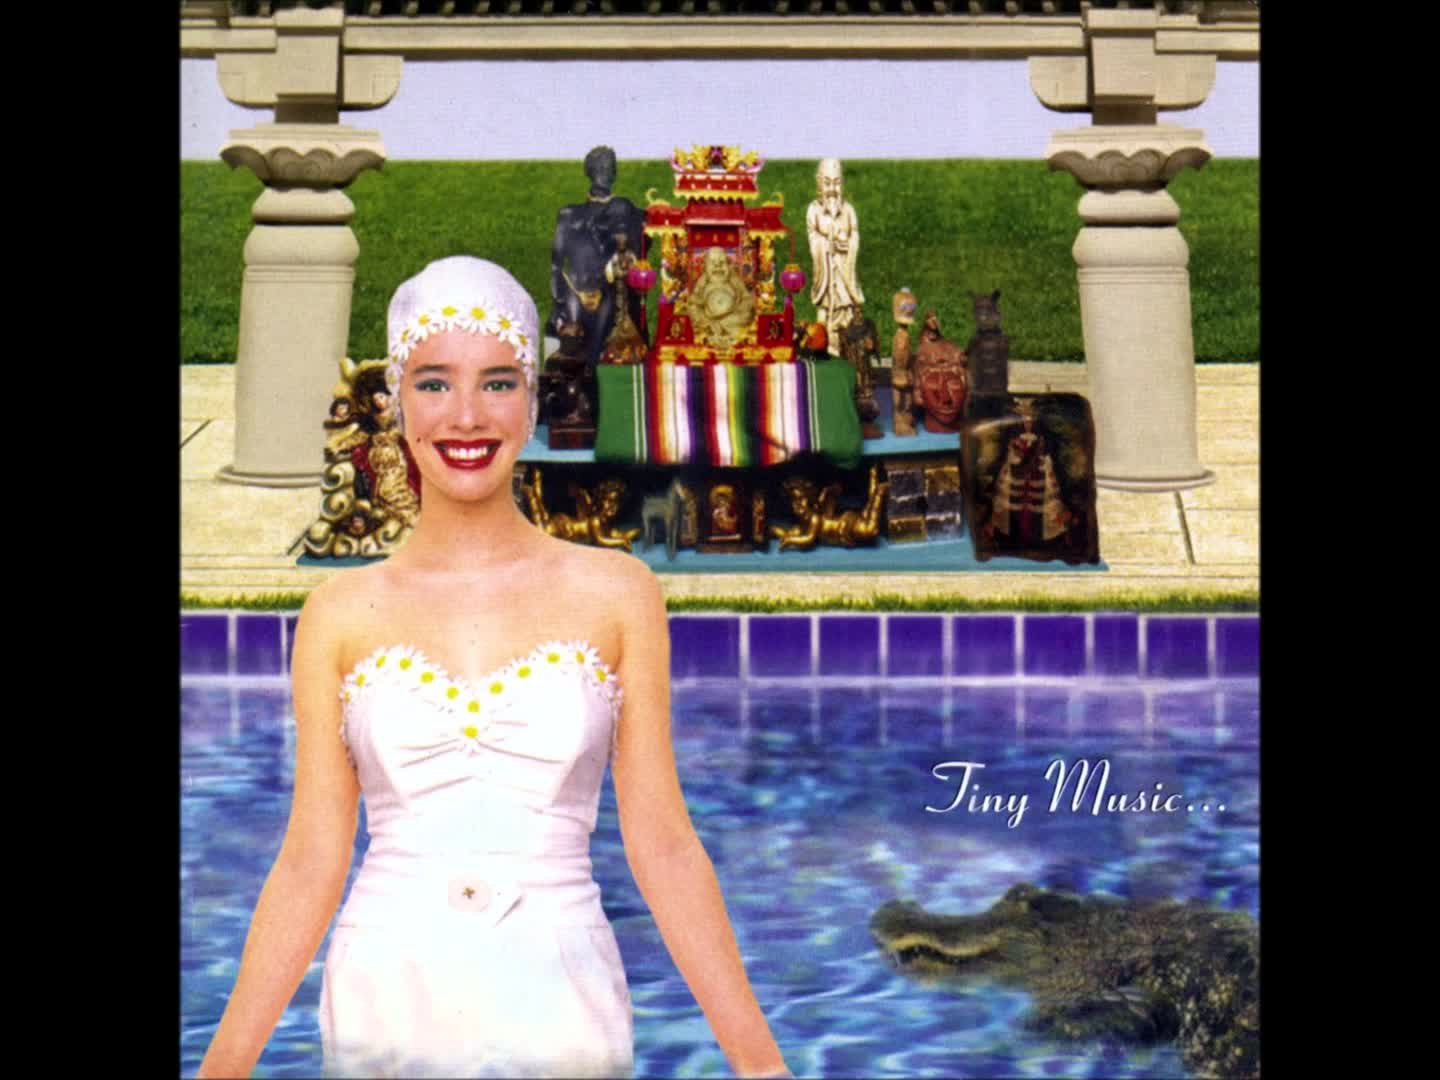 Stone Temple Pilots - Trippin on a Hole in a Paper Heart